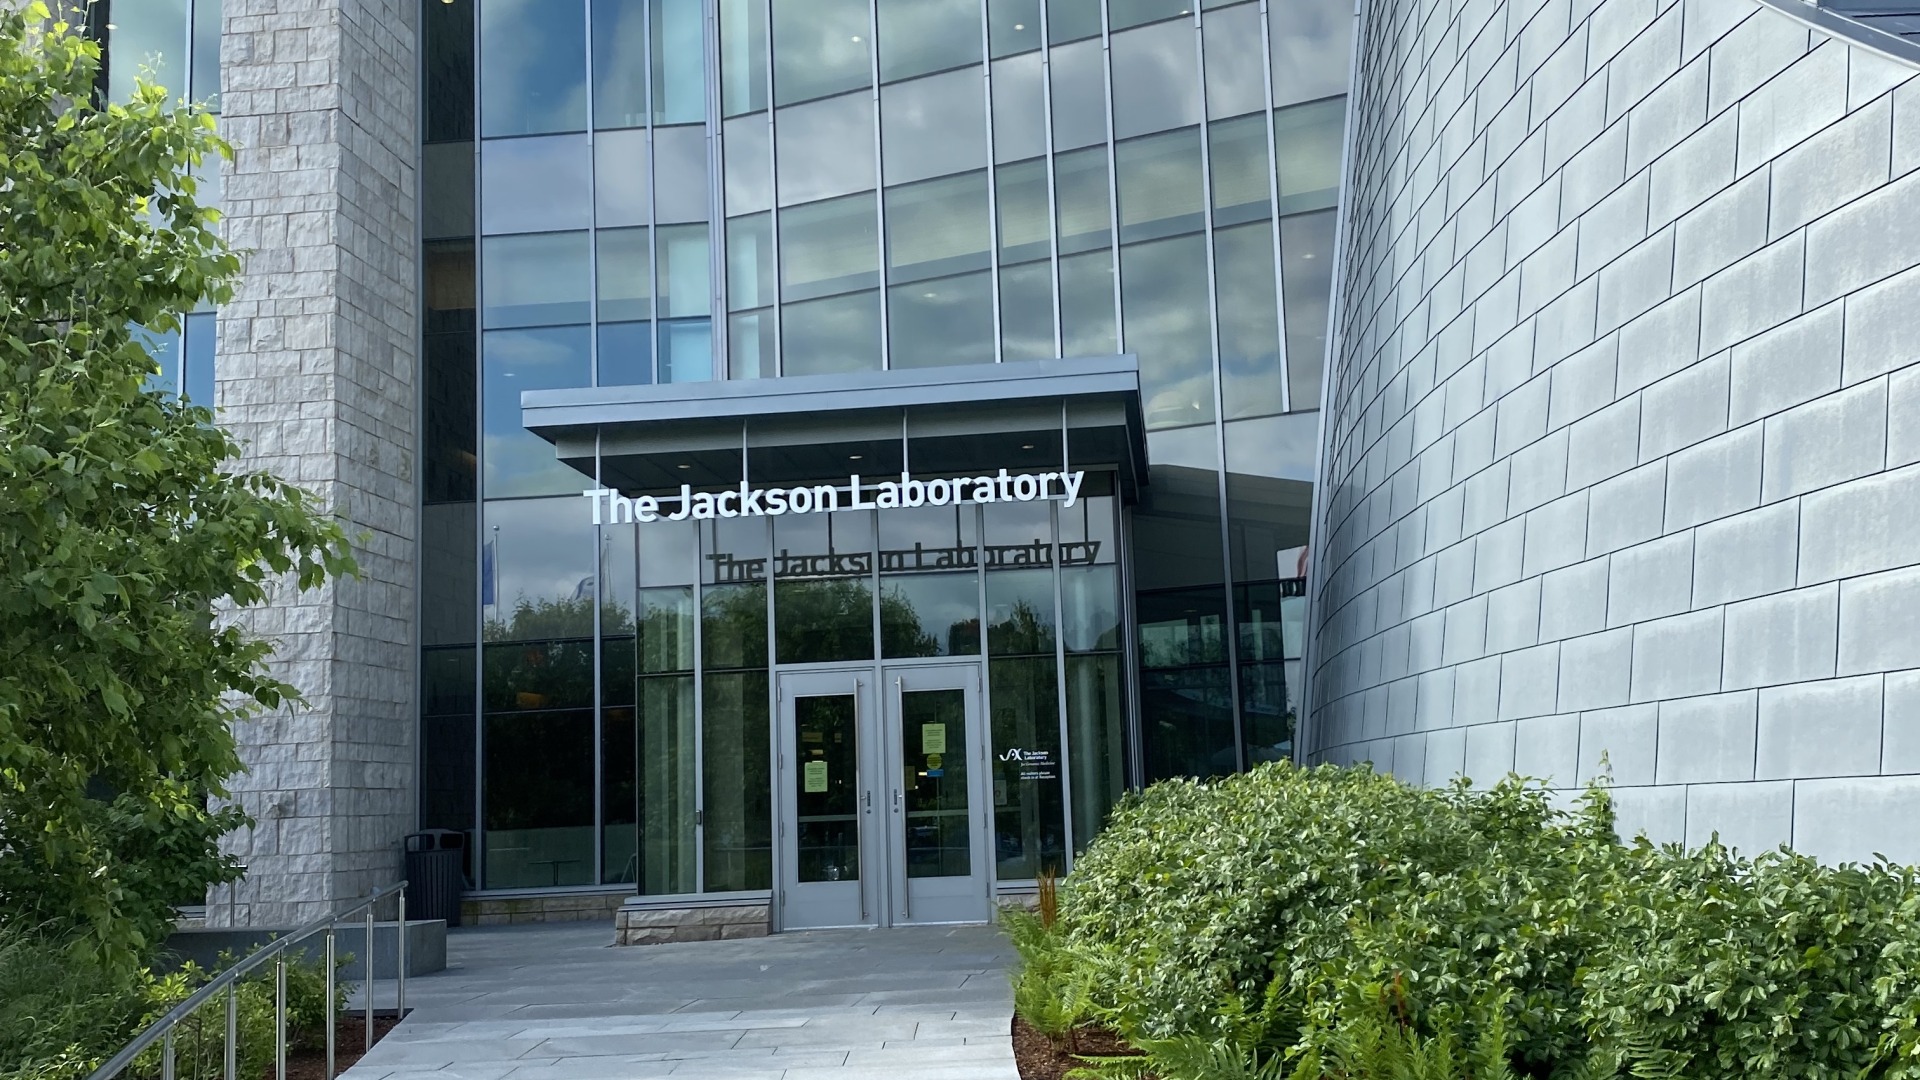 Jackson Laboratory headquarters, you can see the hallway here